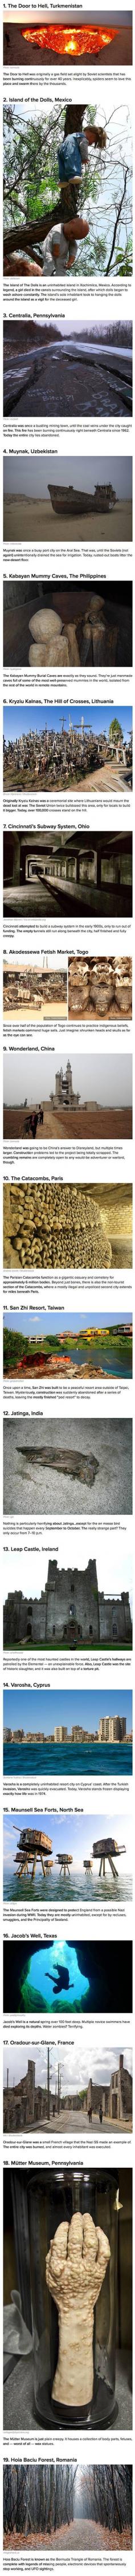 Here are some creepy locations from around the world that actually exist.